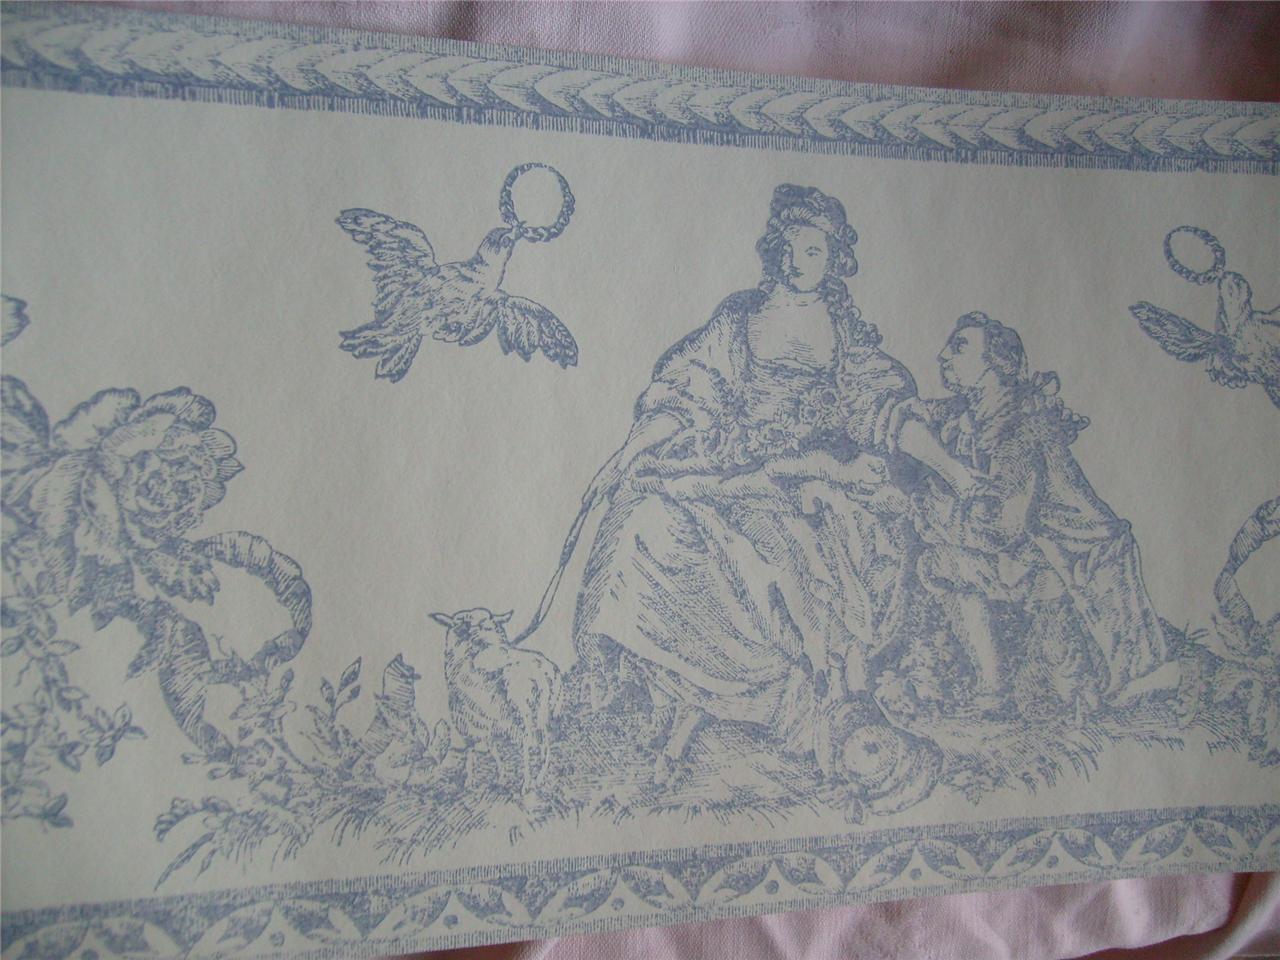 Details about BLUE FRENCH TOILE WILMAN WALLPAPER BORDERS BN 5M ROLLS